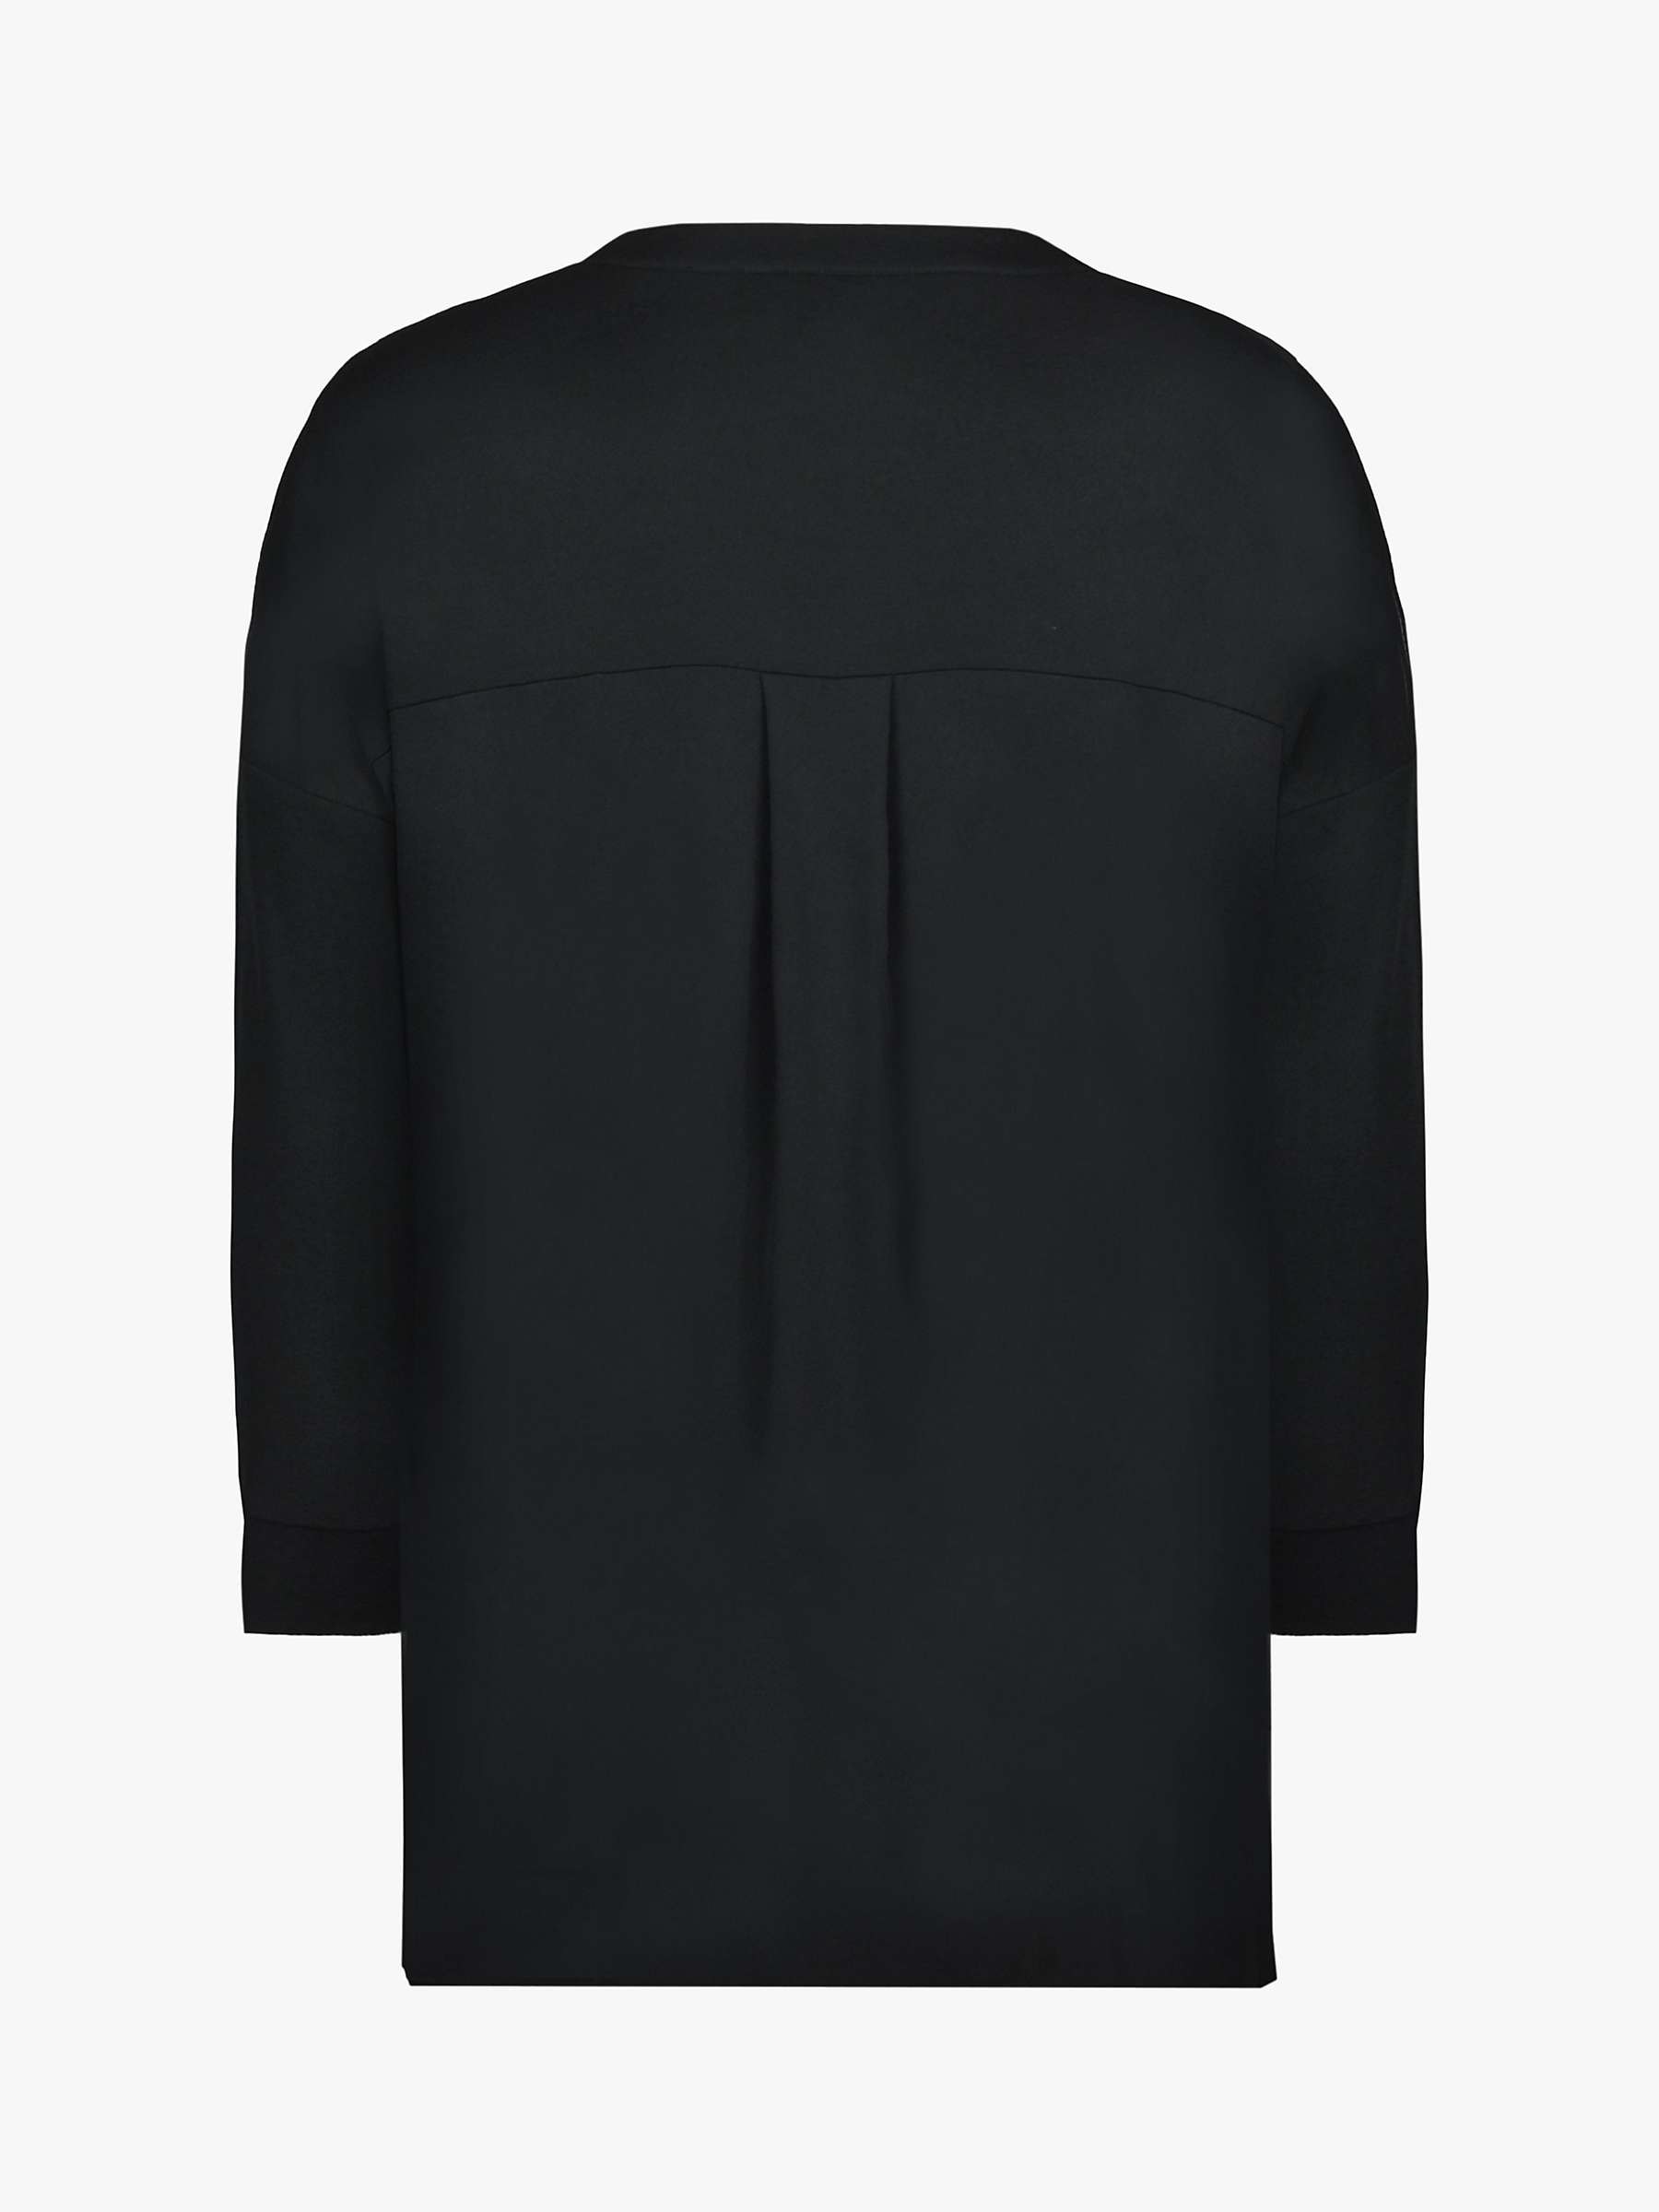 Buy LIVE by Live Unlimited Curve Sustain Back Pleat Shirt, Black Online at johnlewis.com